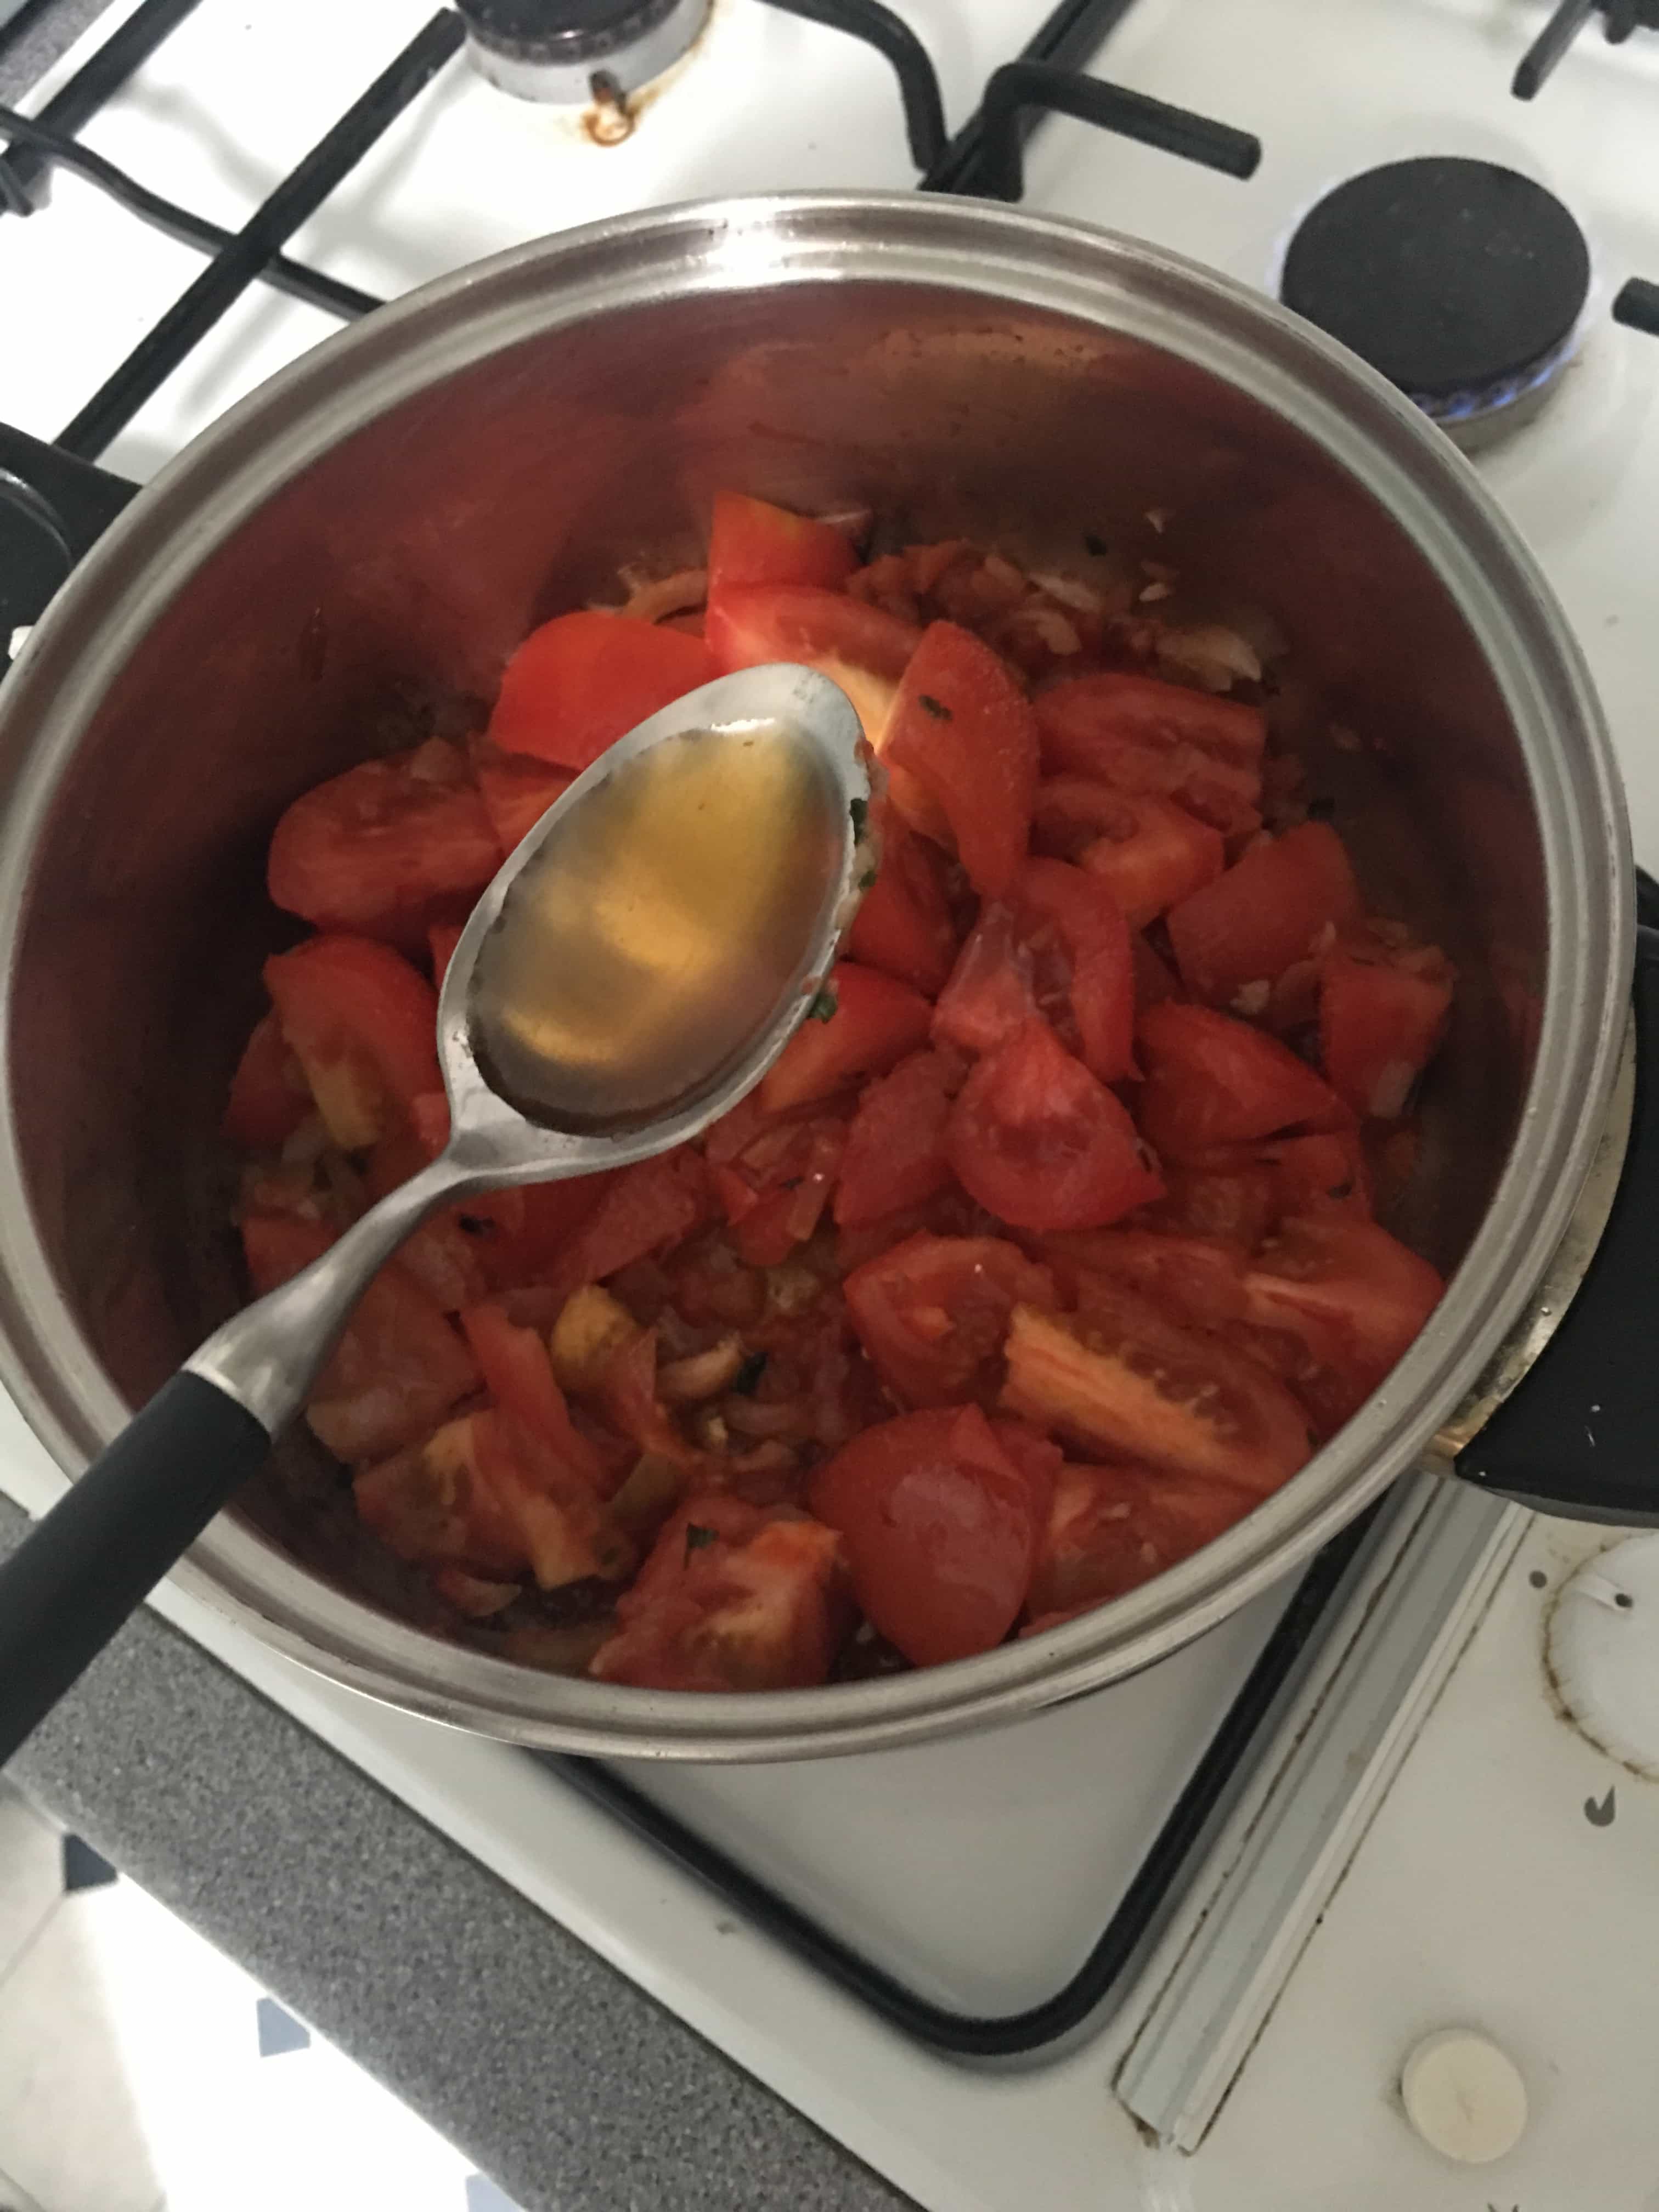 Tomatoes in the pan all ready to go